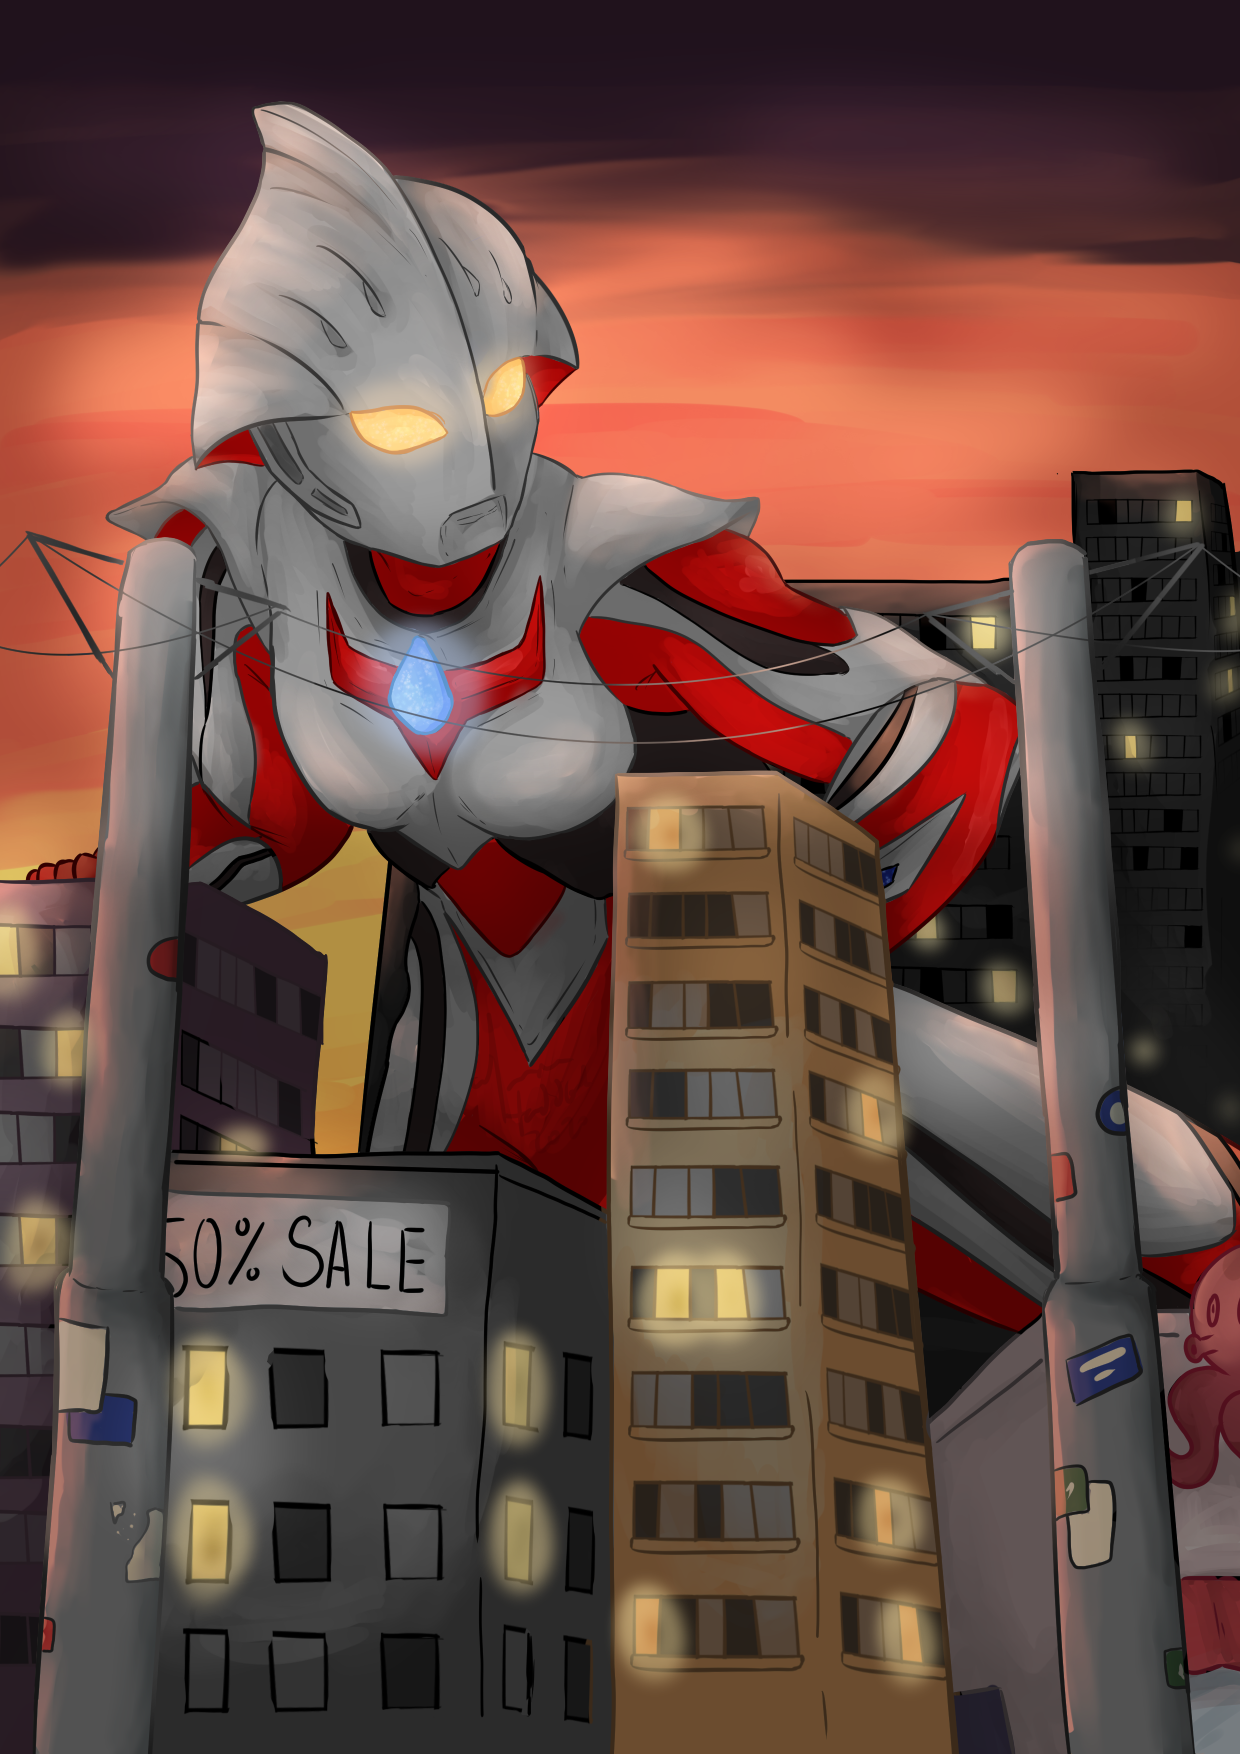 Ultraman Nexus - red - crouching in a city at sunset.